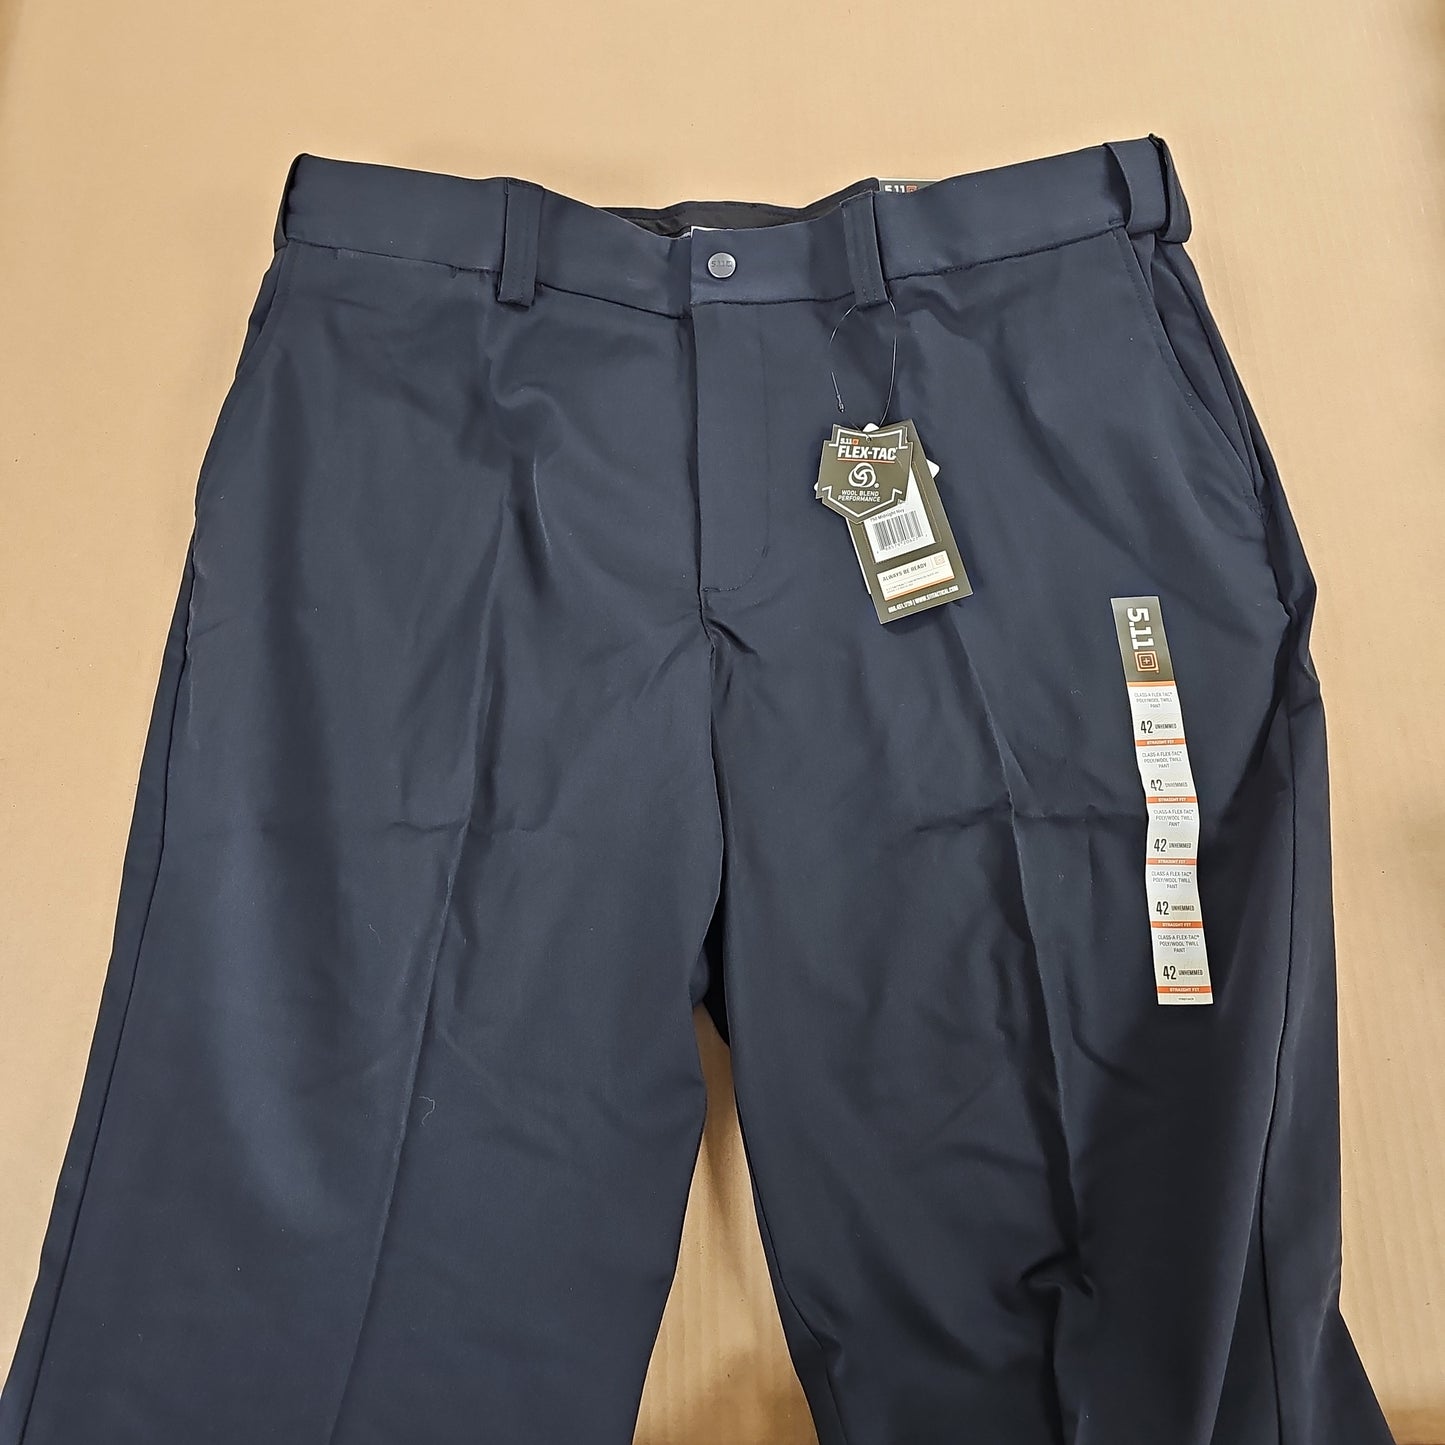 5.11 Tactical Pant: Twill, FT PW, CL-A Mid. Navy, 42 74492-750-42